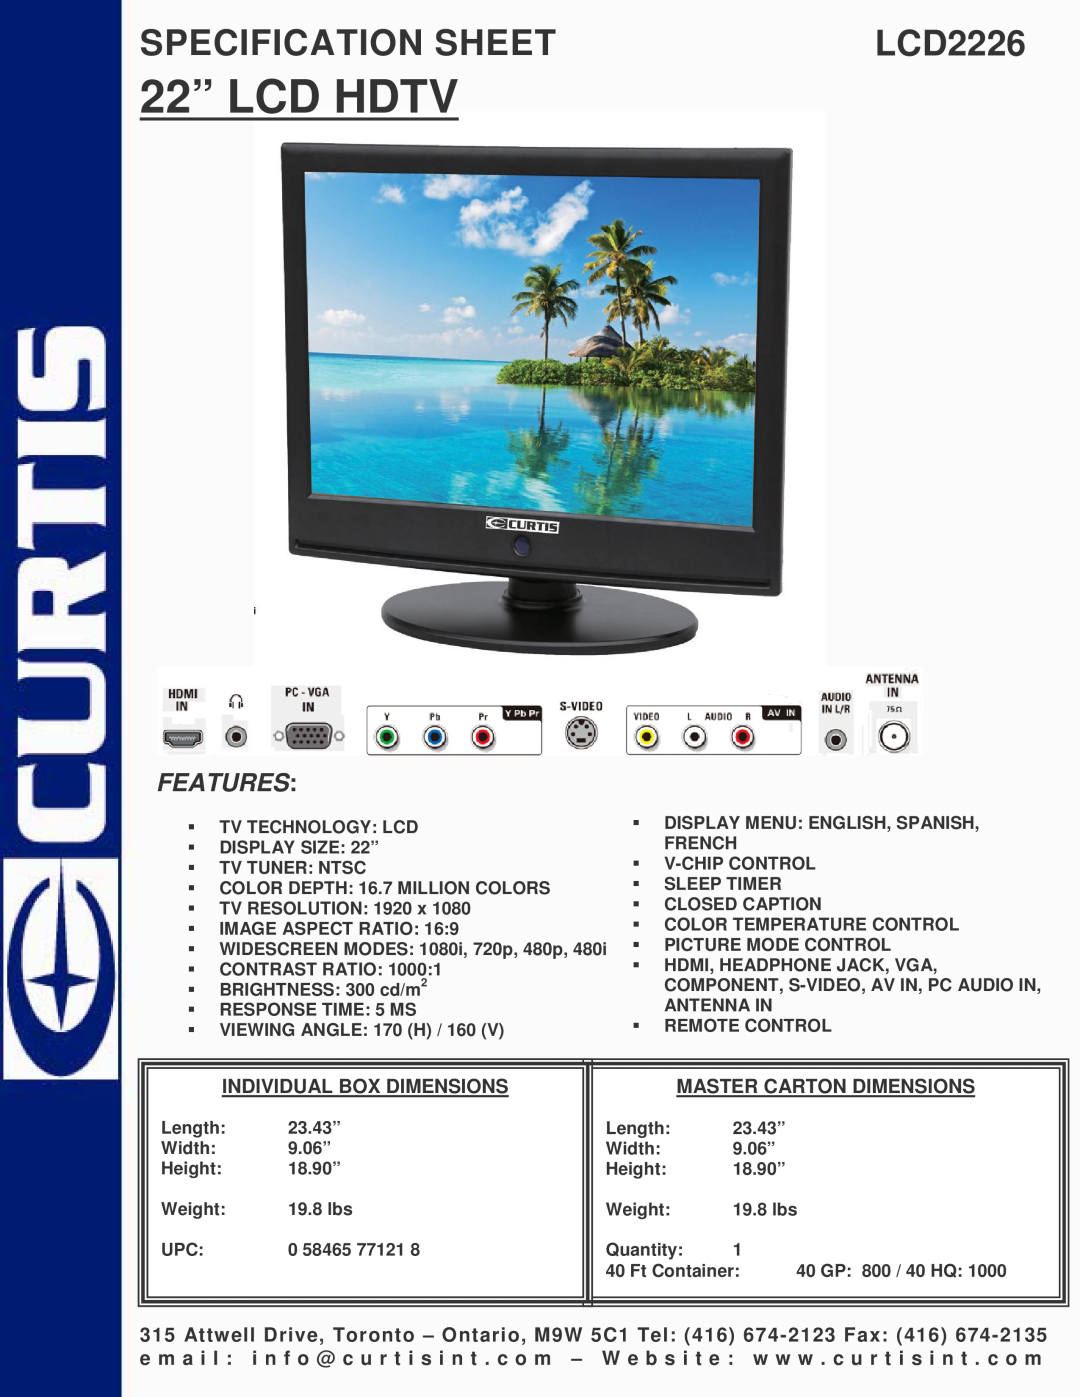 Curtis LCD2226 specifications 22” LCD HDTV, Specification Sheet, Features, Individual Box Dimensions 